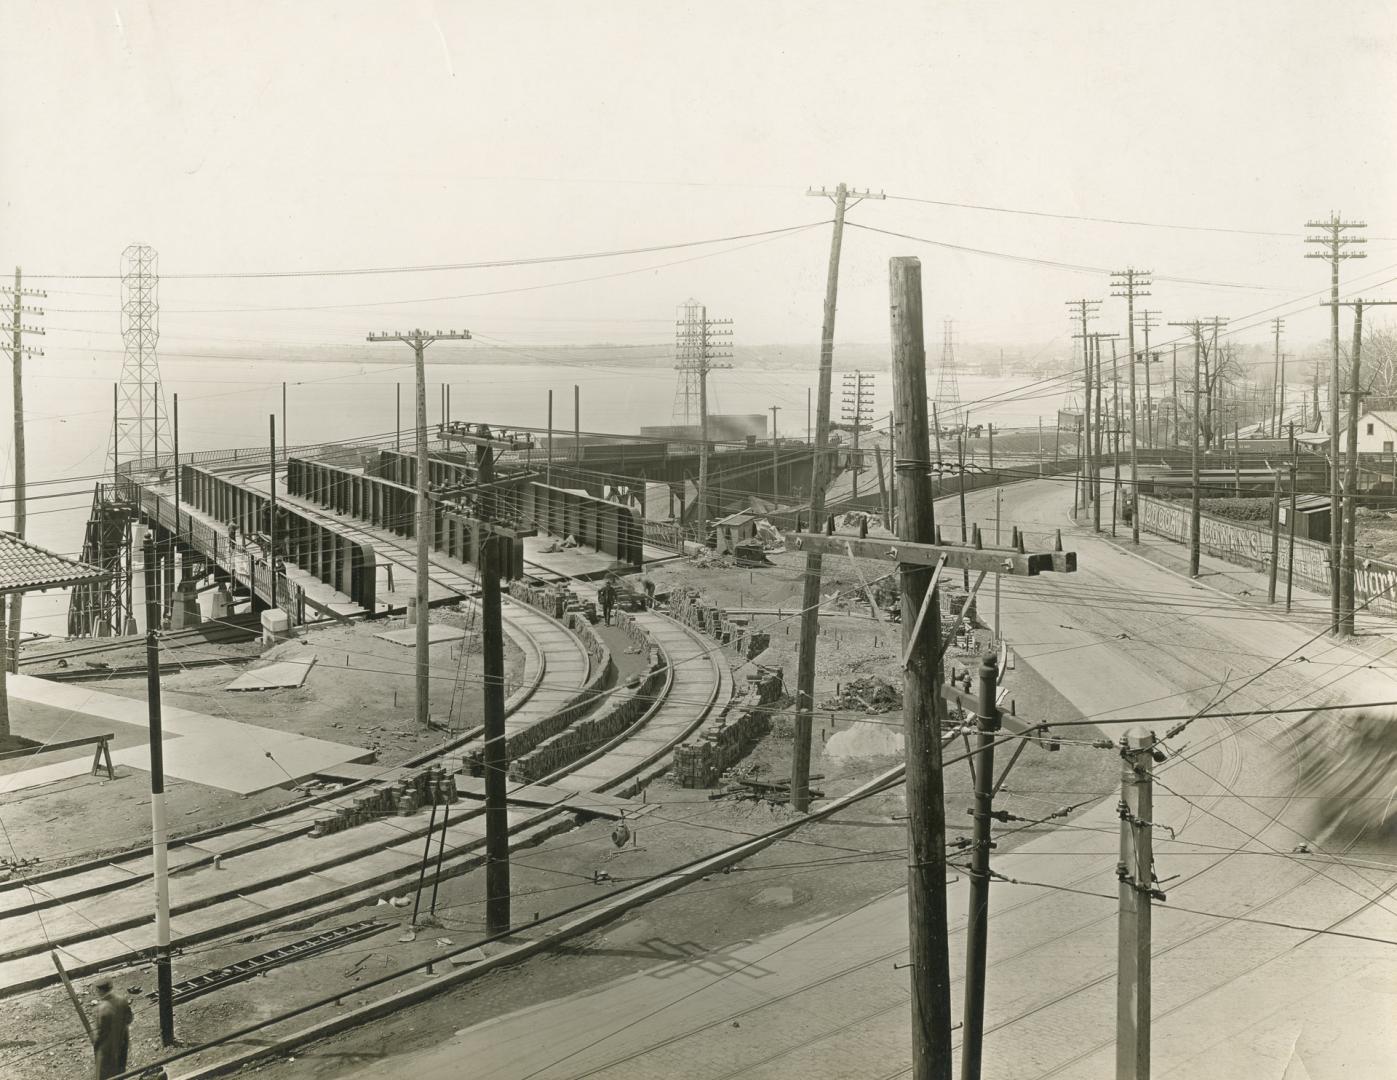 Lakeshore Road., looking southwest from King-Roncesvalles intersection to bridge over C.N.R. tracks, showing The Queensway at right